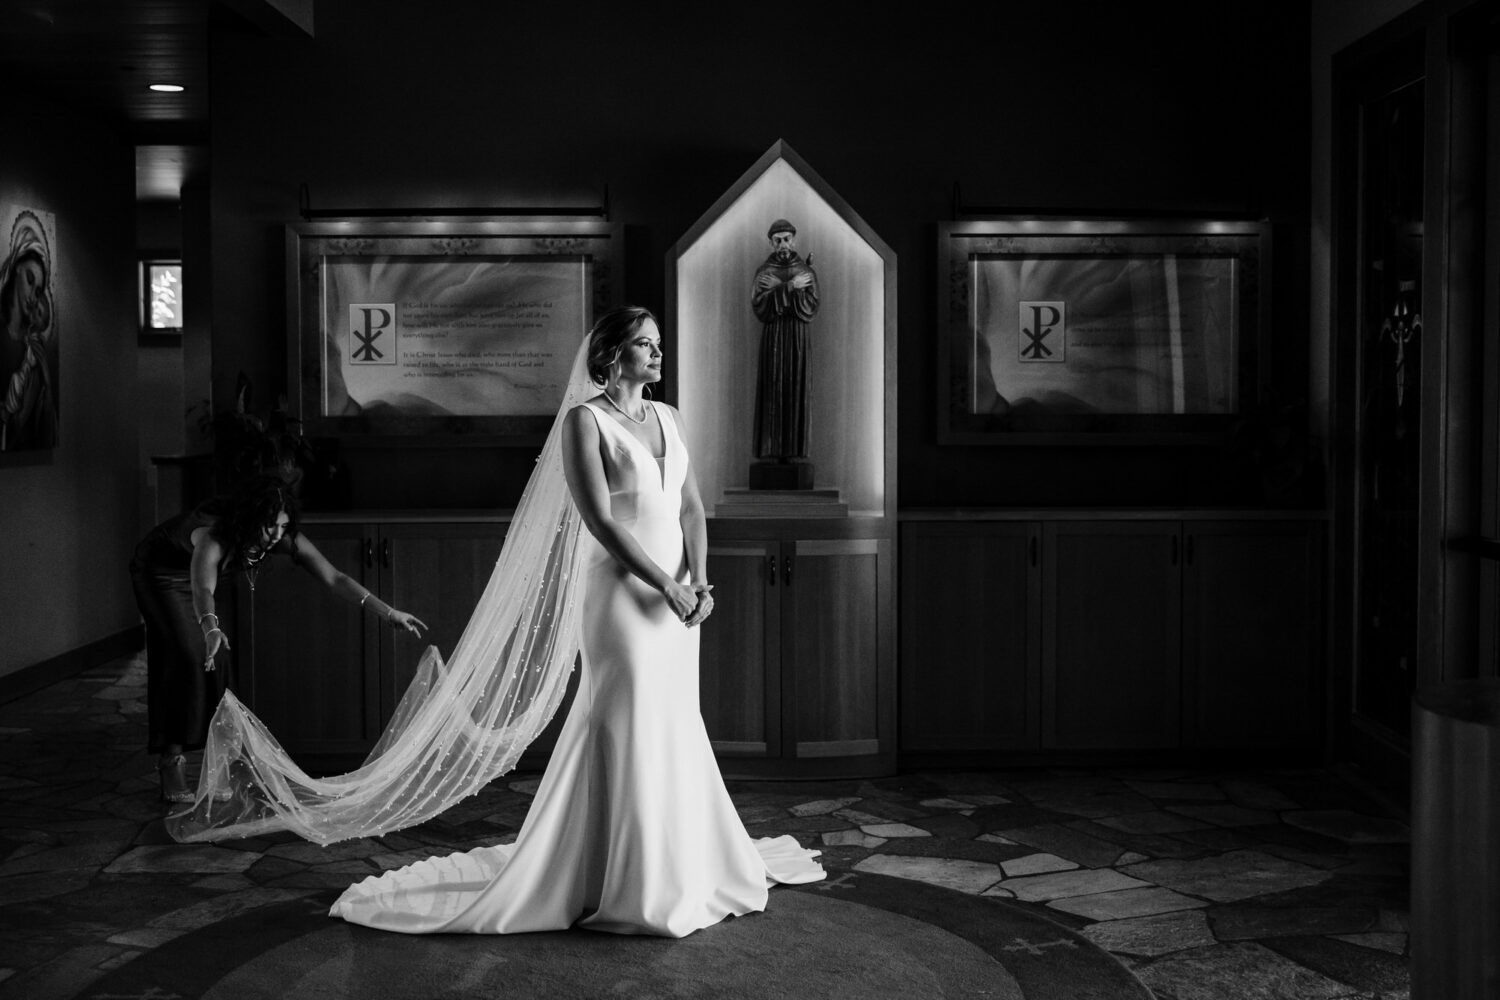 The maid of honor adjusts the bride's long veil before a wedding at St Francis of Assisi in Incline Village.